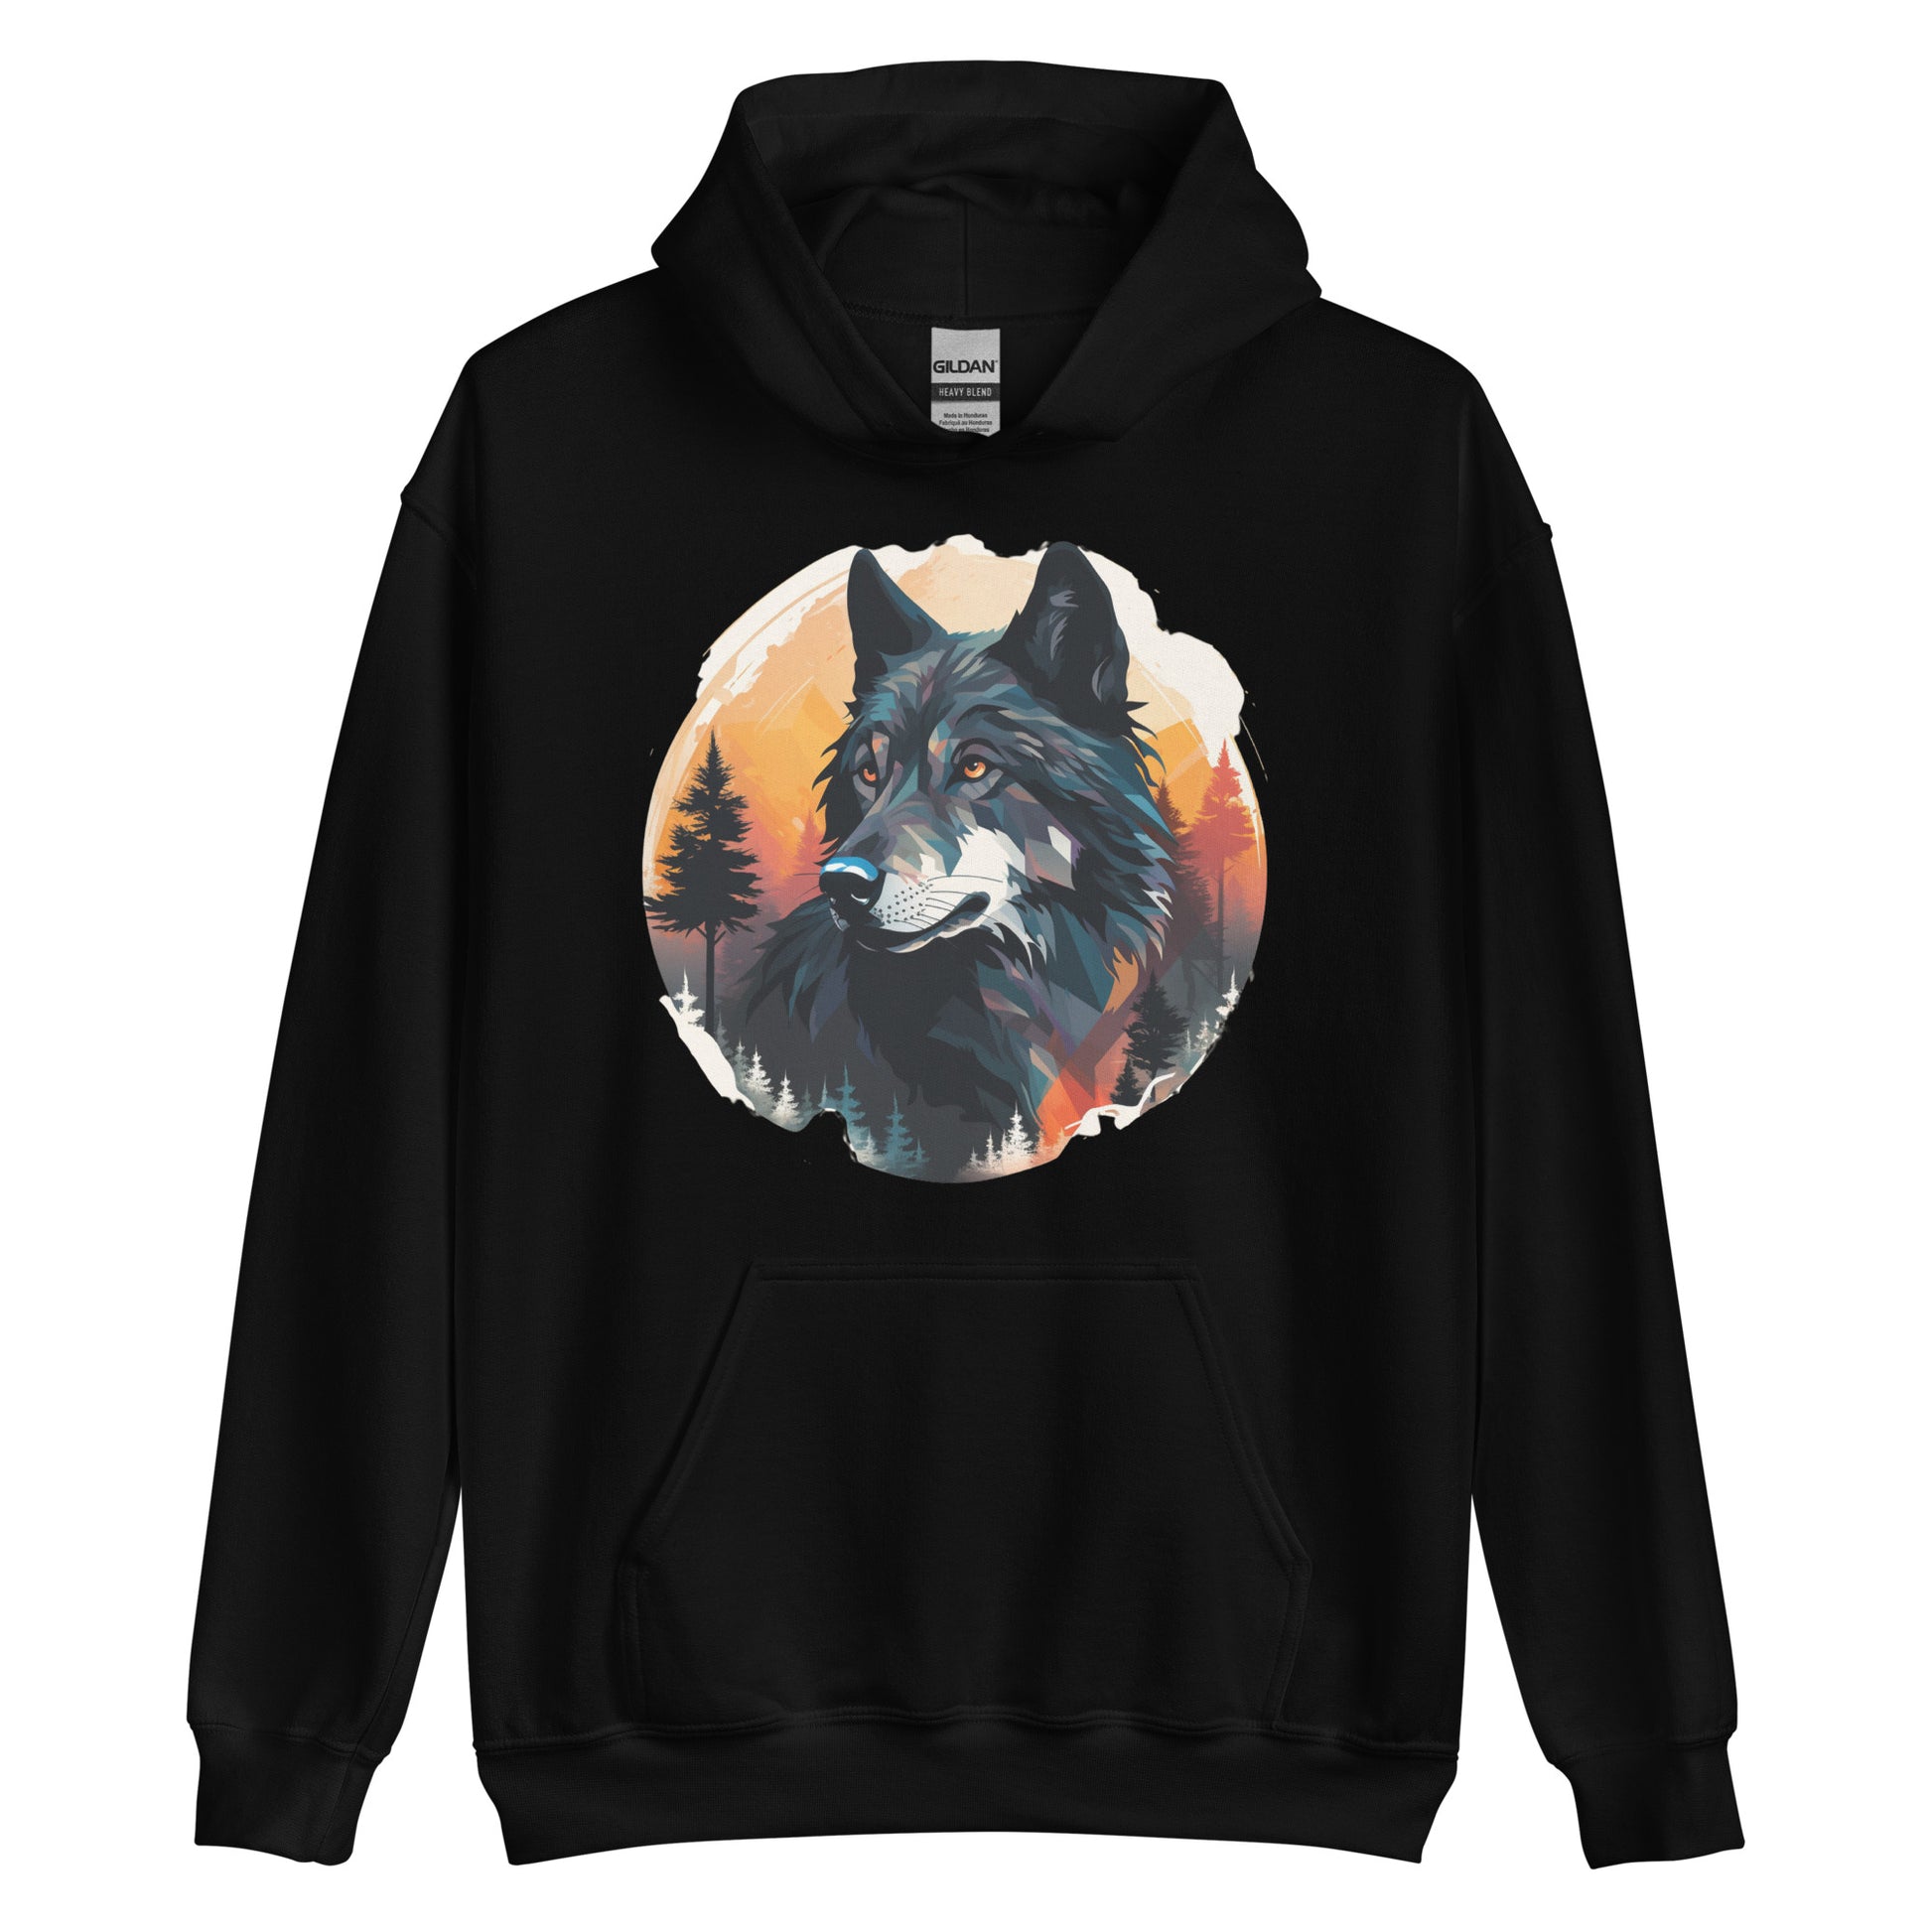 A black hoodie featuring a large circular graphic print on the front. The print showcases an intricate illustration of a wolf's head with a backdrop of pine trees and a warm sunset gradient. The hoodie has a kangaroo pocket and is made from a heavy blend fabric, with the Gildan brand tag visible on the inside collar.